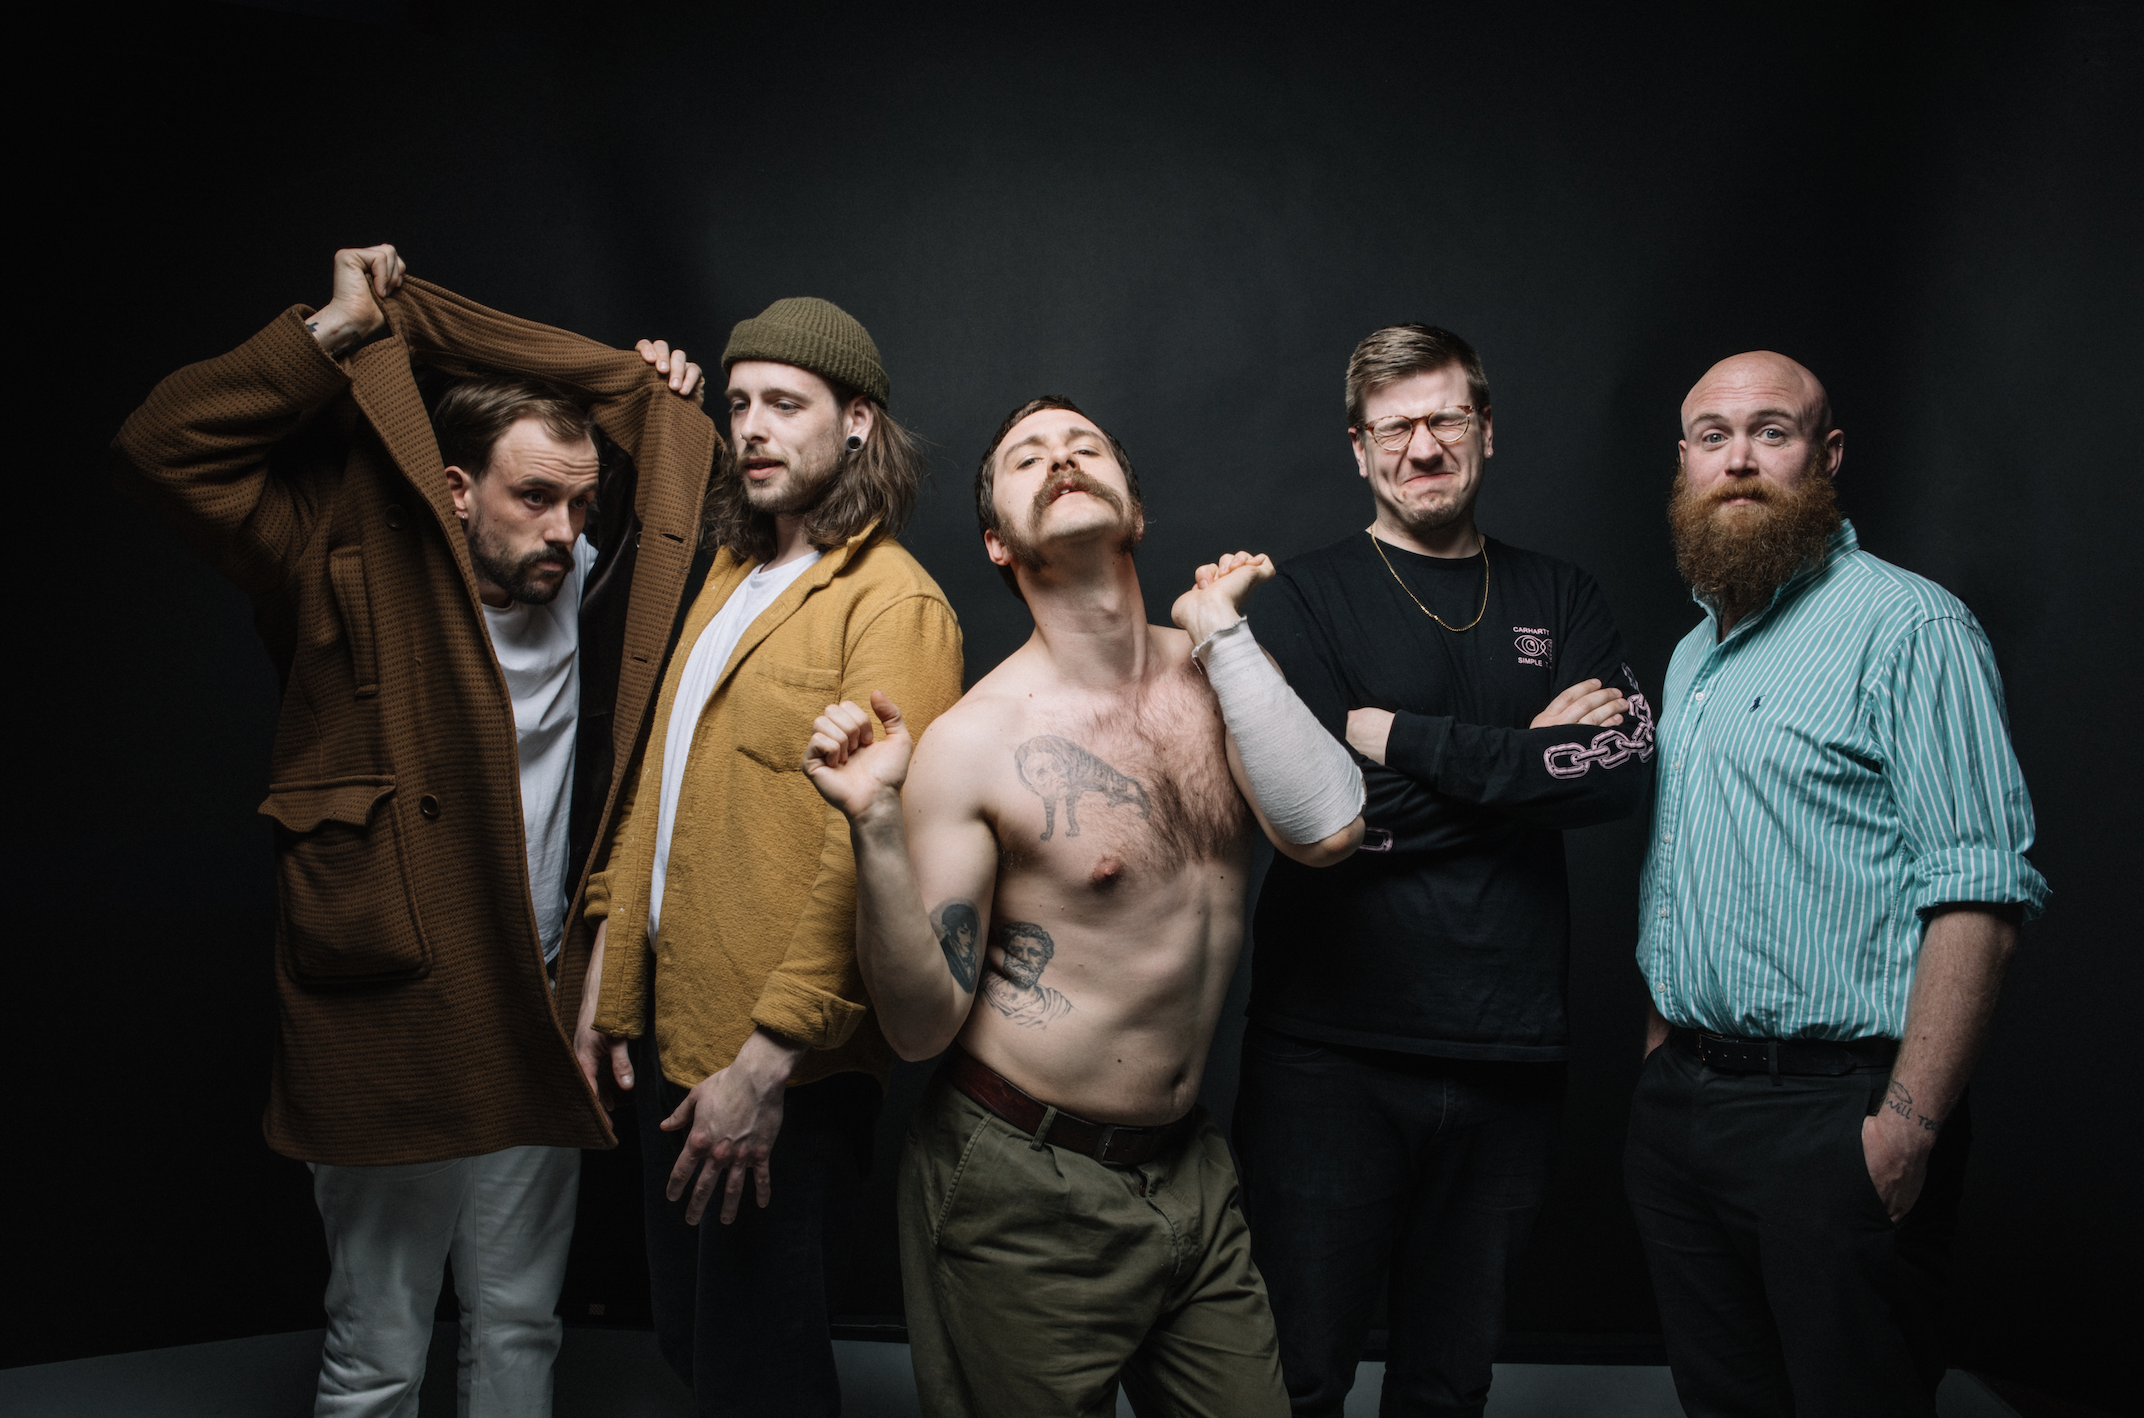 IDLES – Joy as an Act of Resistance.